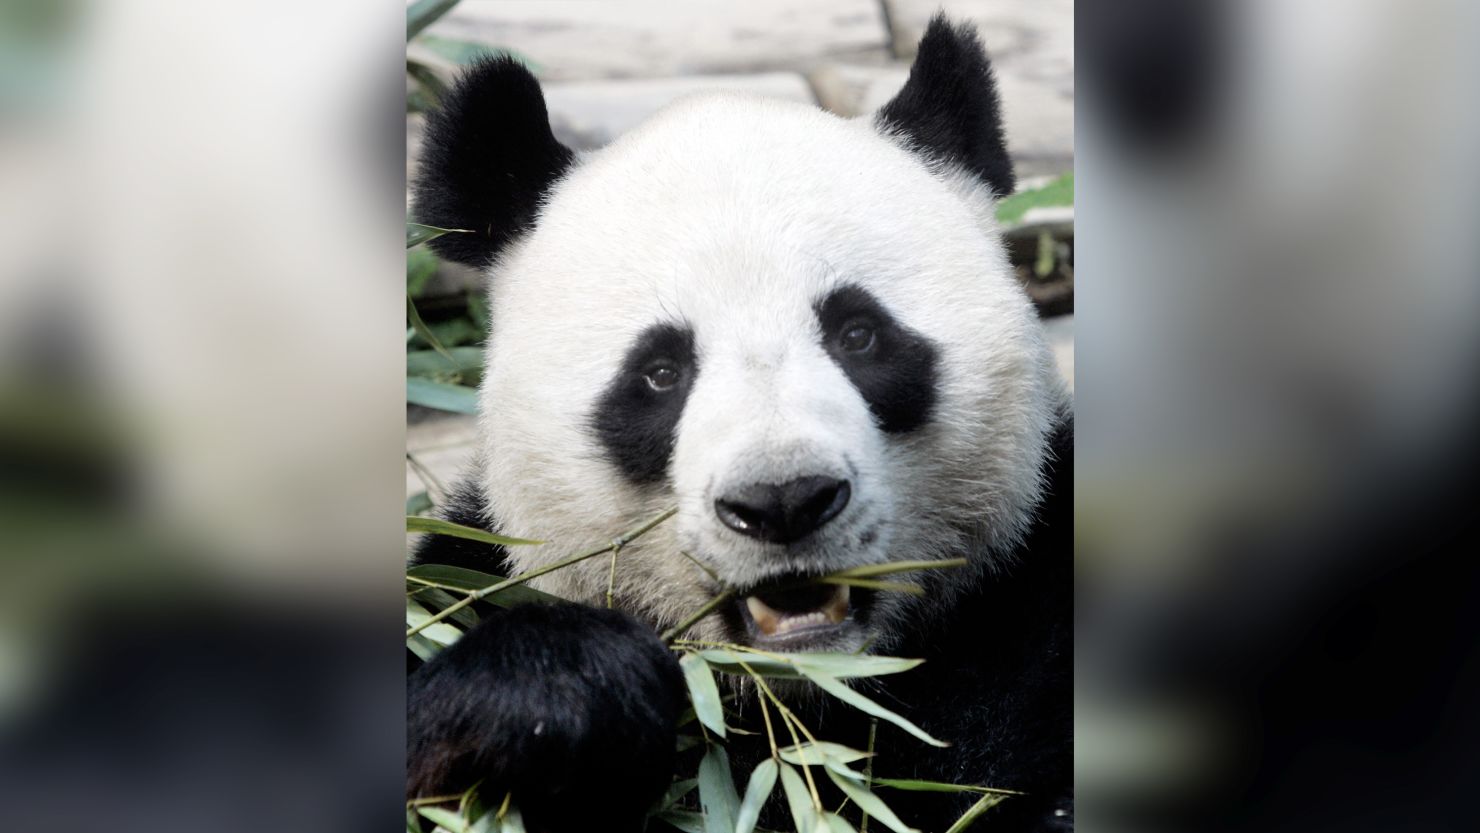 Officials said Chuang Chuang, pictured here in 2007, collapsed Monday in his enclosure at the Chiang Mai Zoo shortly after a meal of bamboo leaves. 